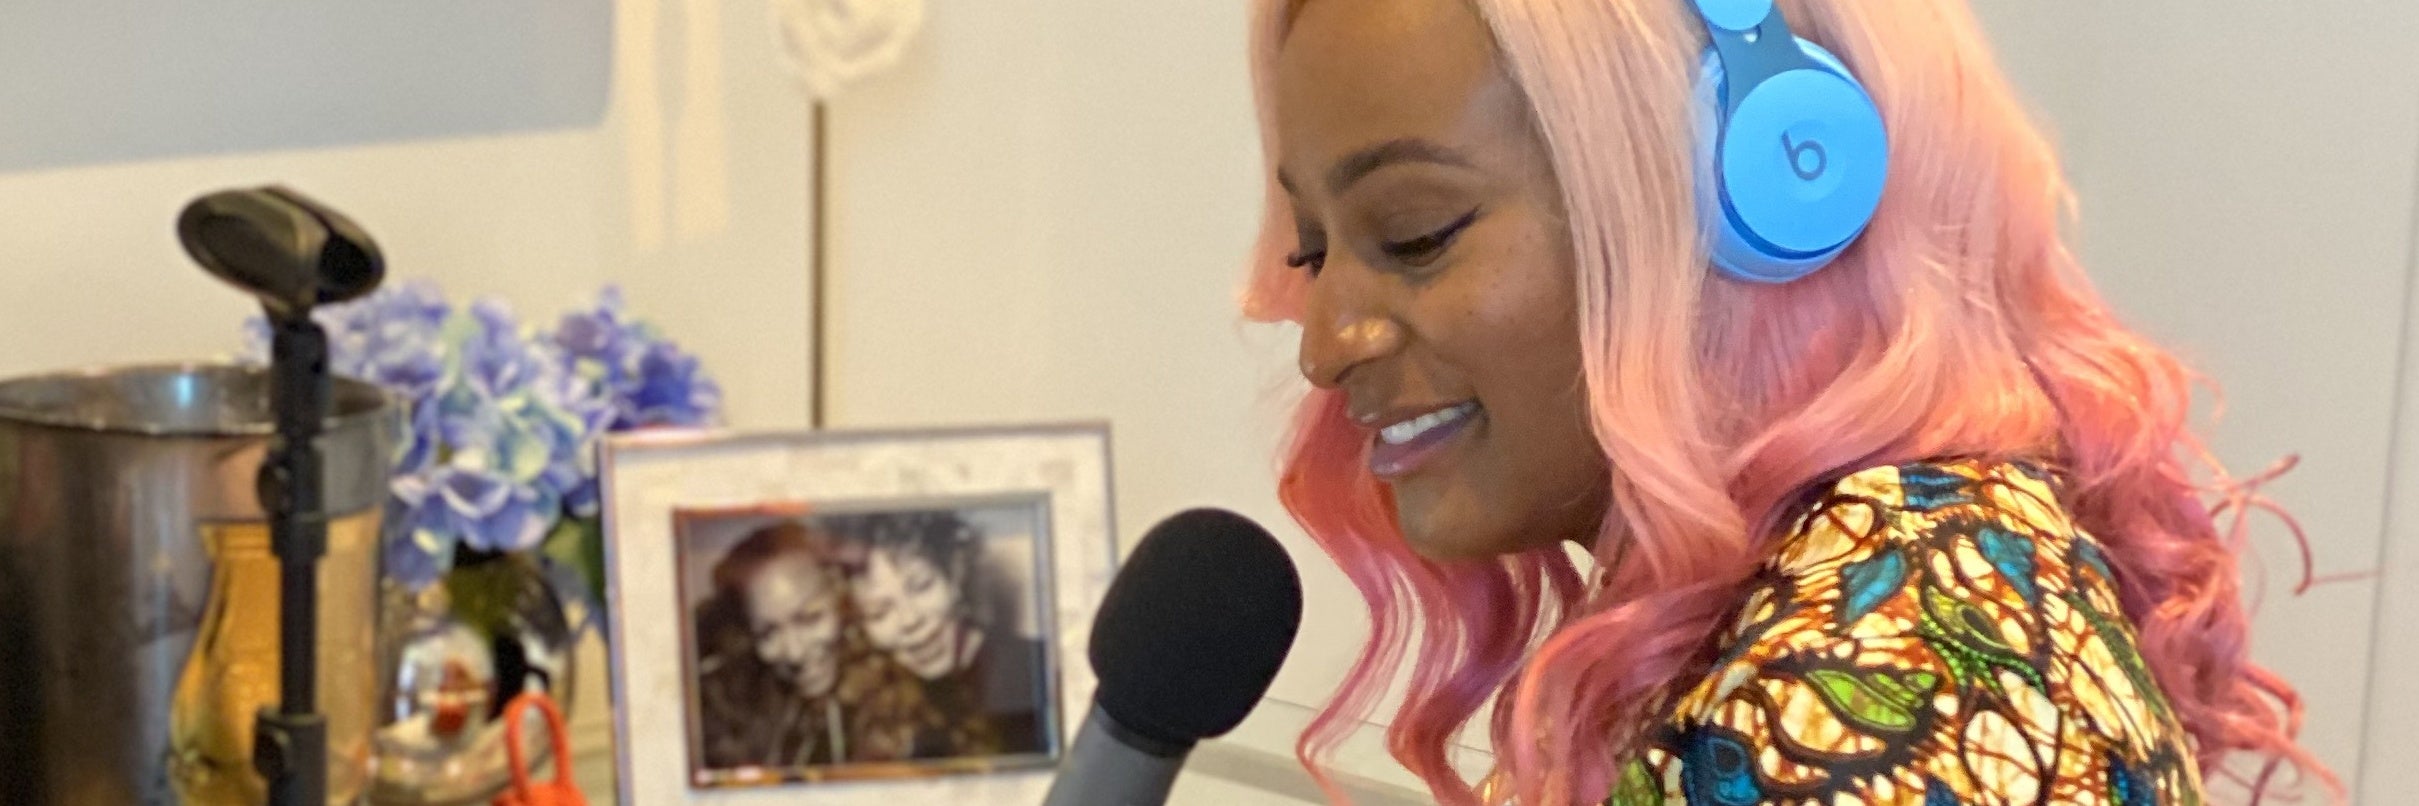 Nigeria’s DJ Cuppy Is Hosting Apple Music's First African Radio Show. And She’s Barely Getting Started.